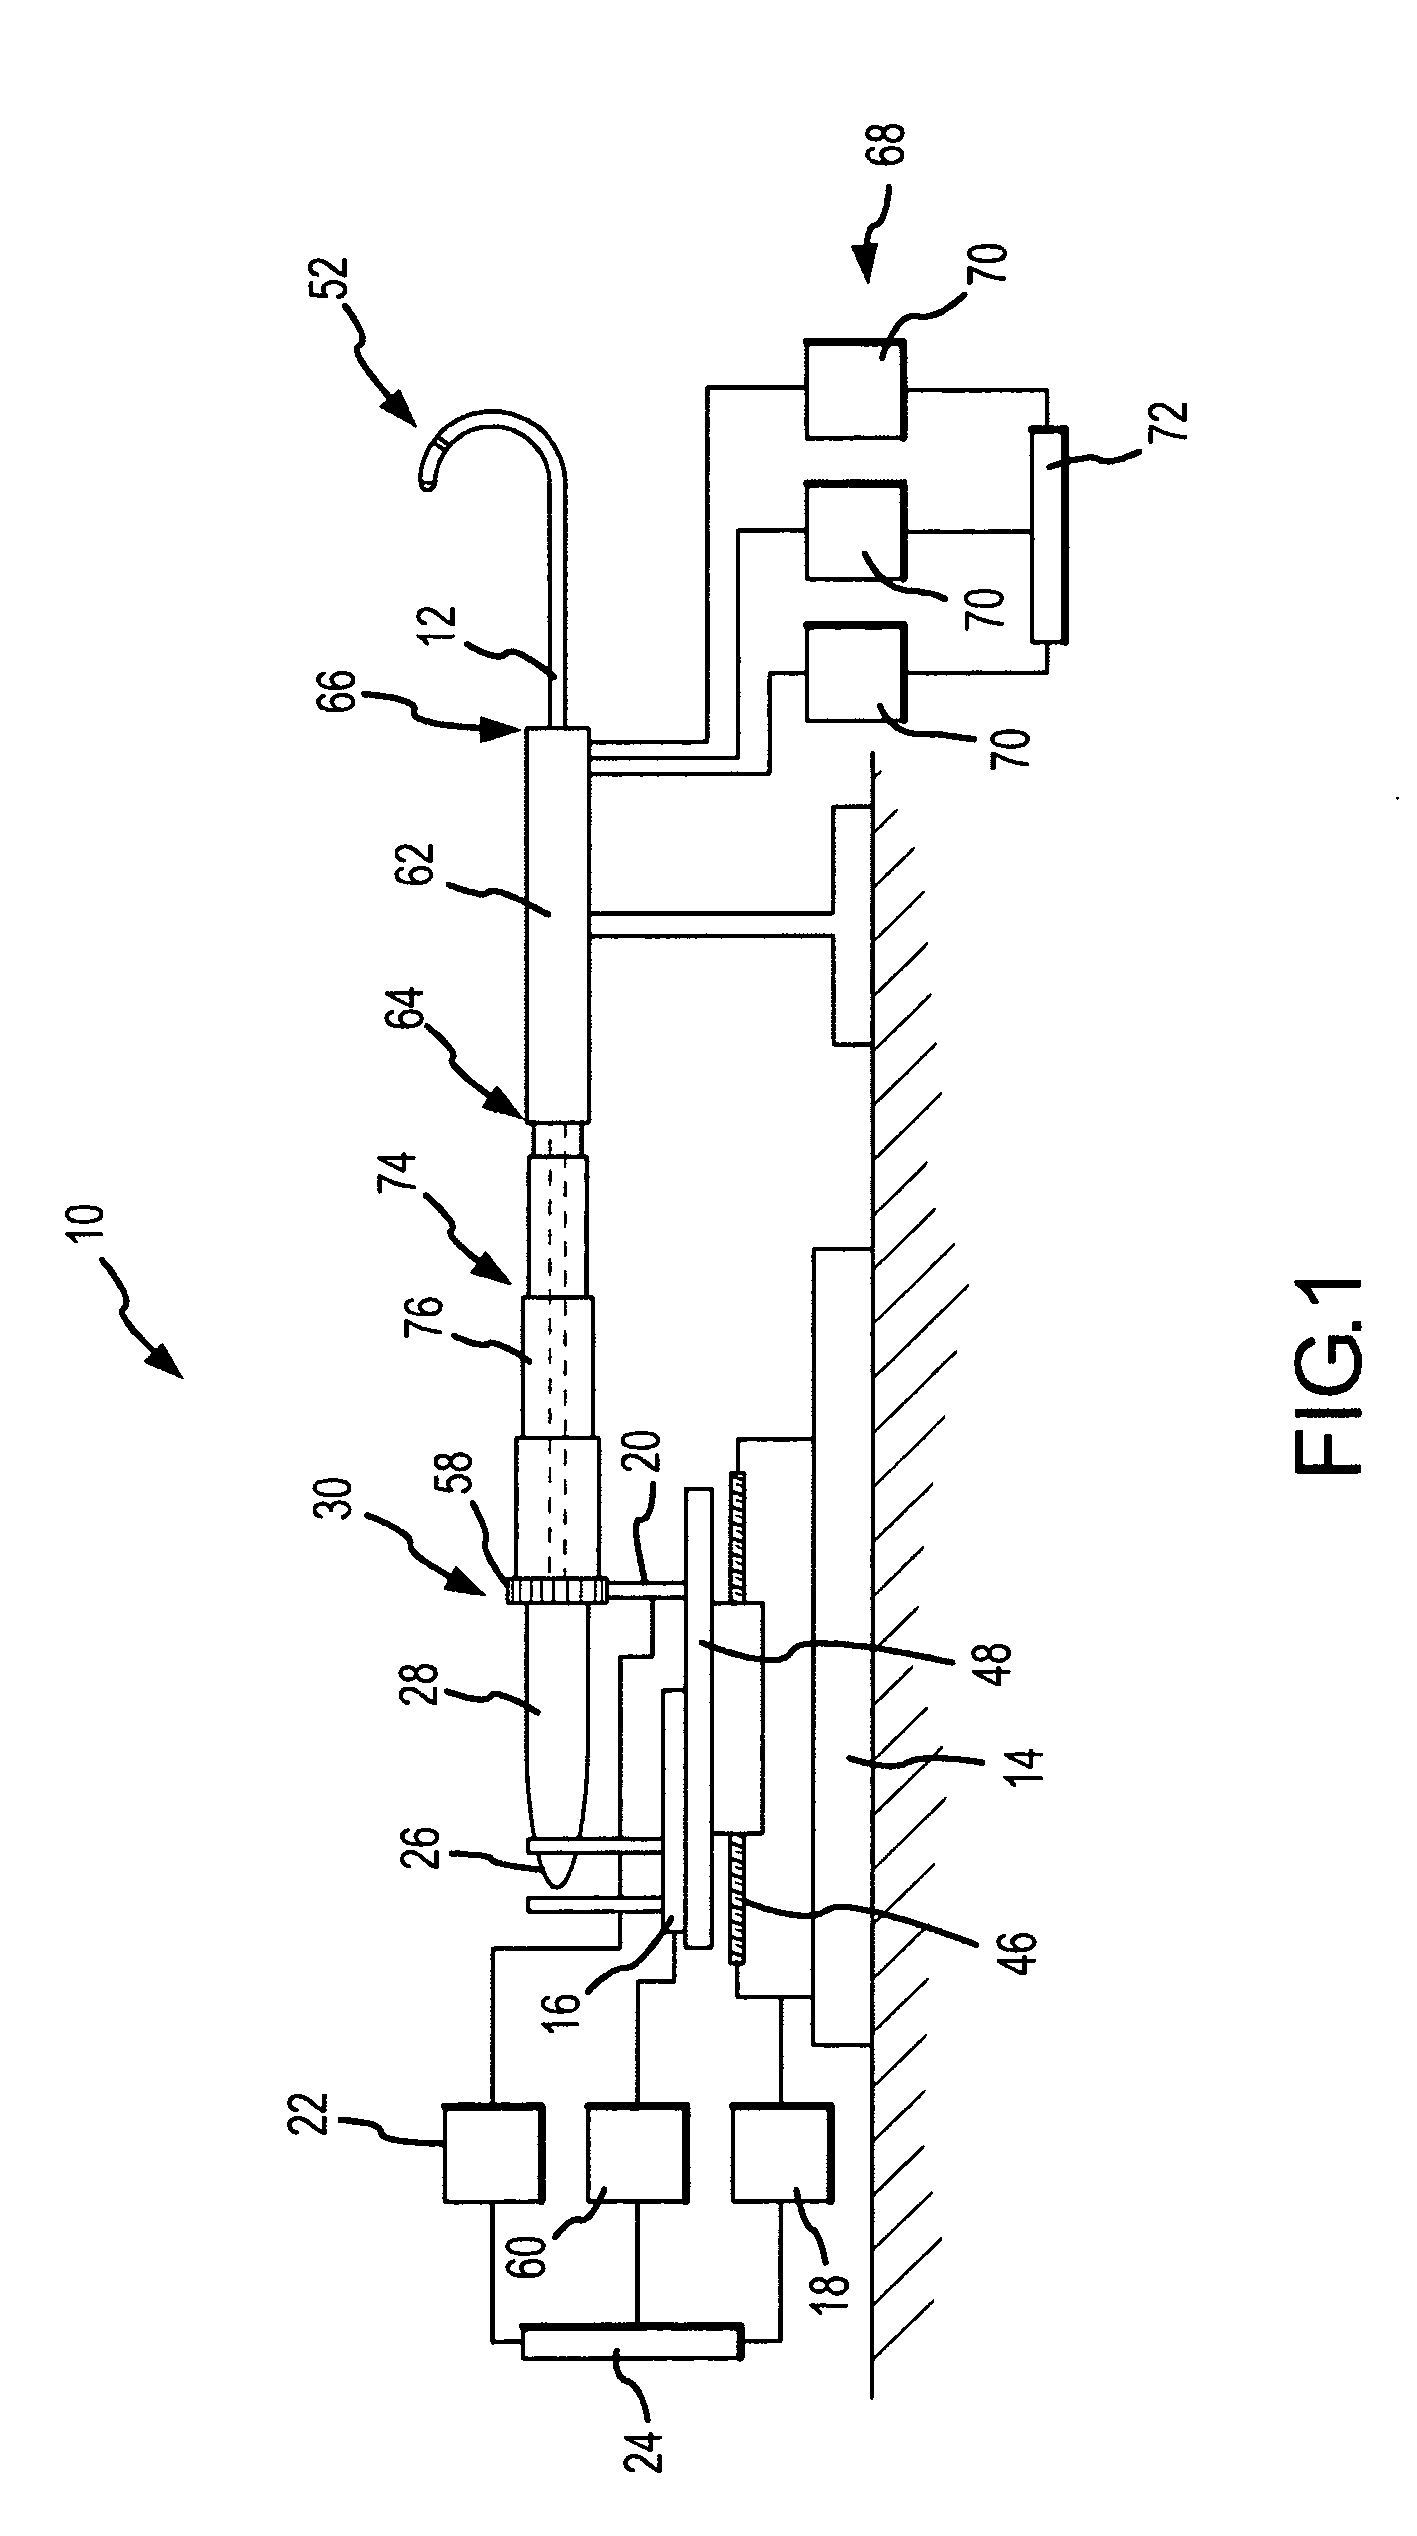 Robotic surgical system and method for automated creation of ablation lesions